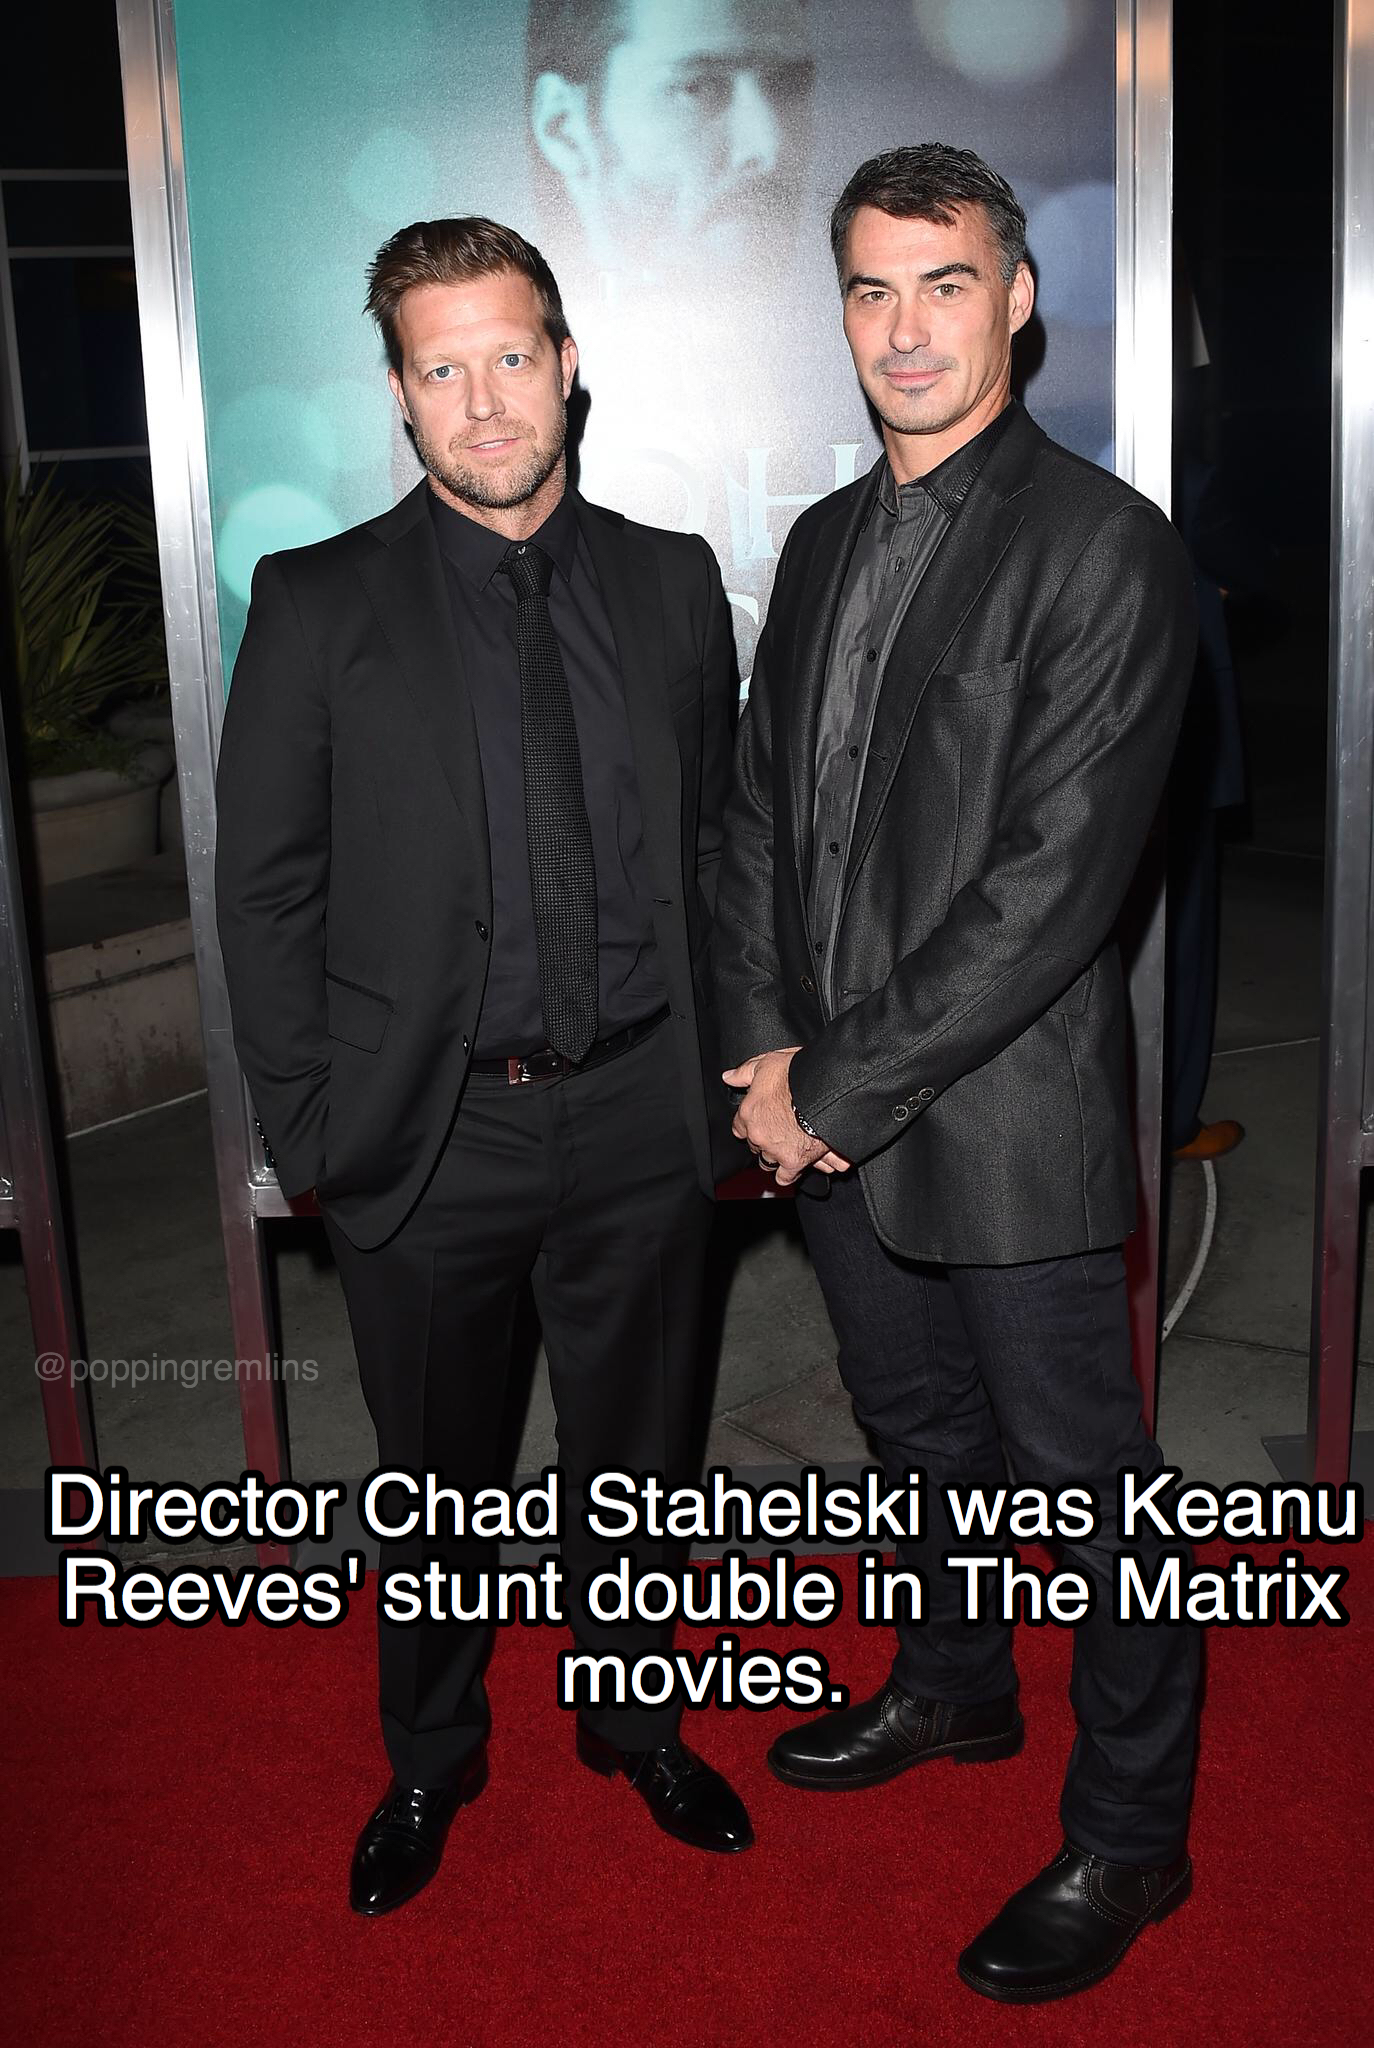 Chad Stahelski - poppingomis Director Chad Stahelski was Keanu Reeves' stunt double in The Matrix movies.